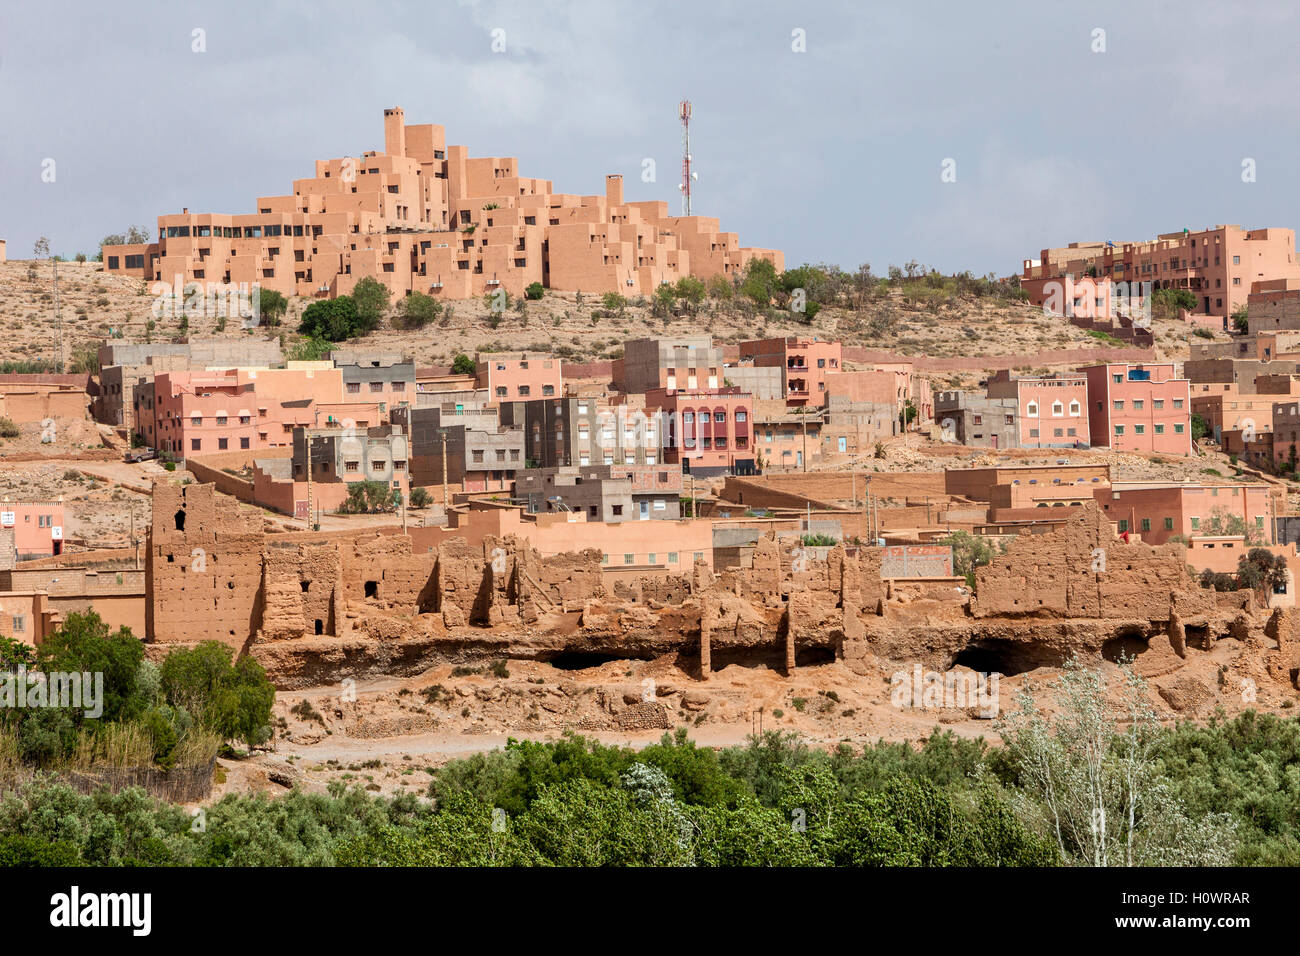 Boulmane, Morocco.  Hotel Xaluca at top, Modern Apartments in Middle, Abandoned Traditional Houses at Bottom. Stock Photo